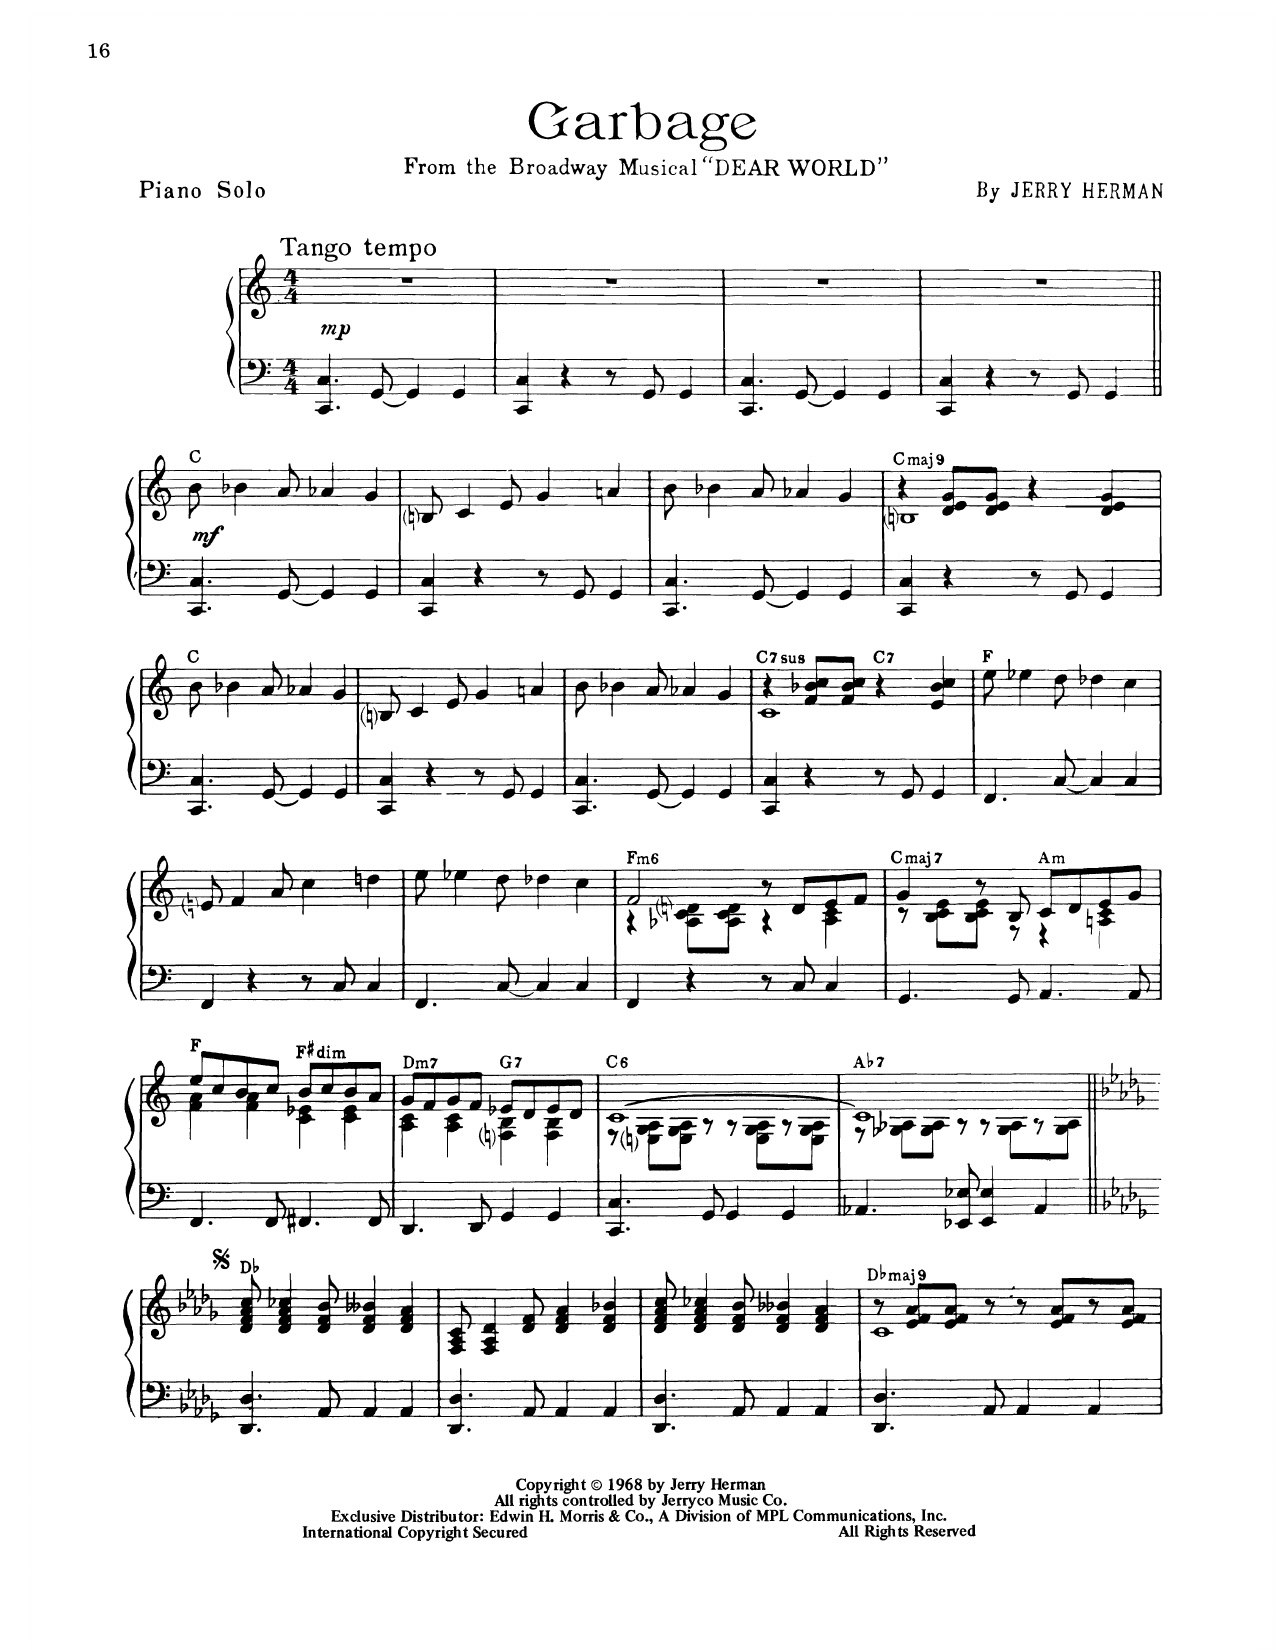 Jerry Herman Garbage (from Dear World) sheet music notes printable PDF score